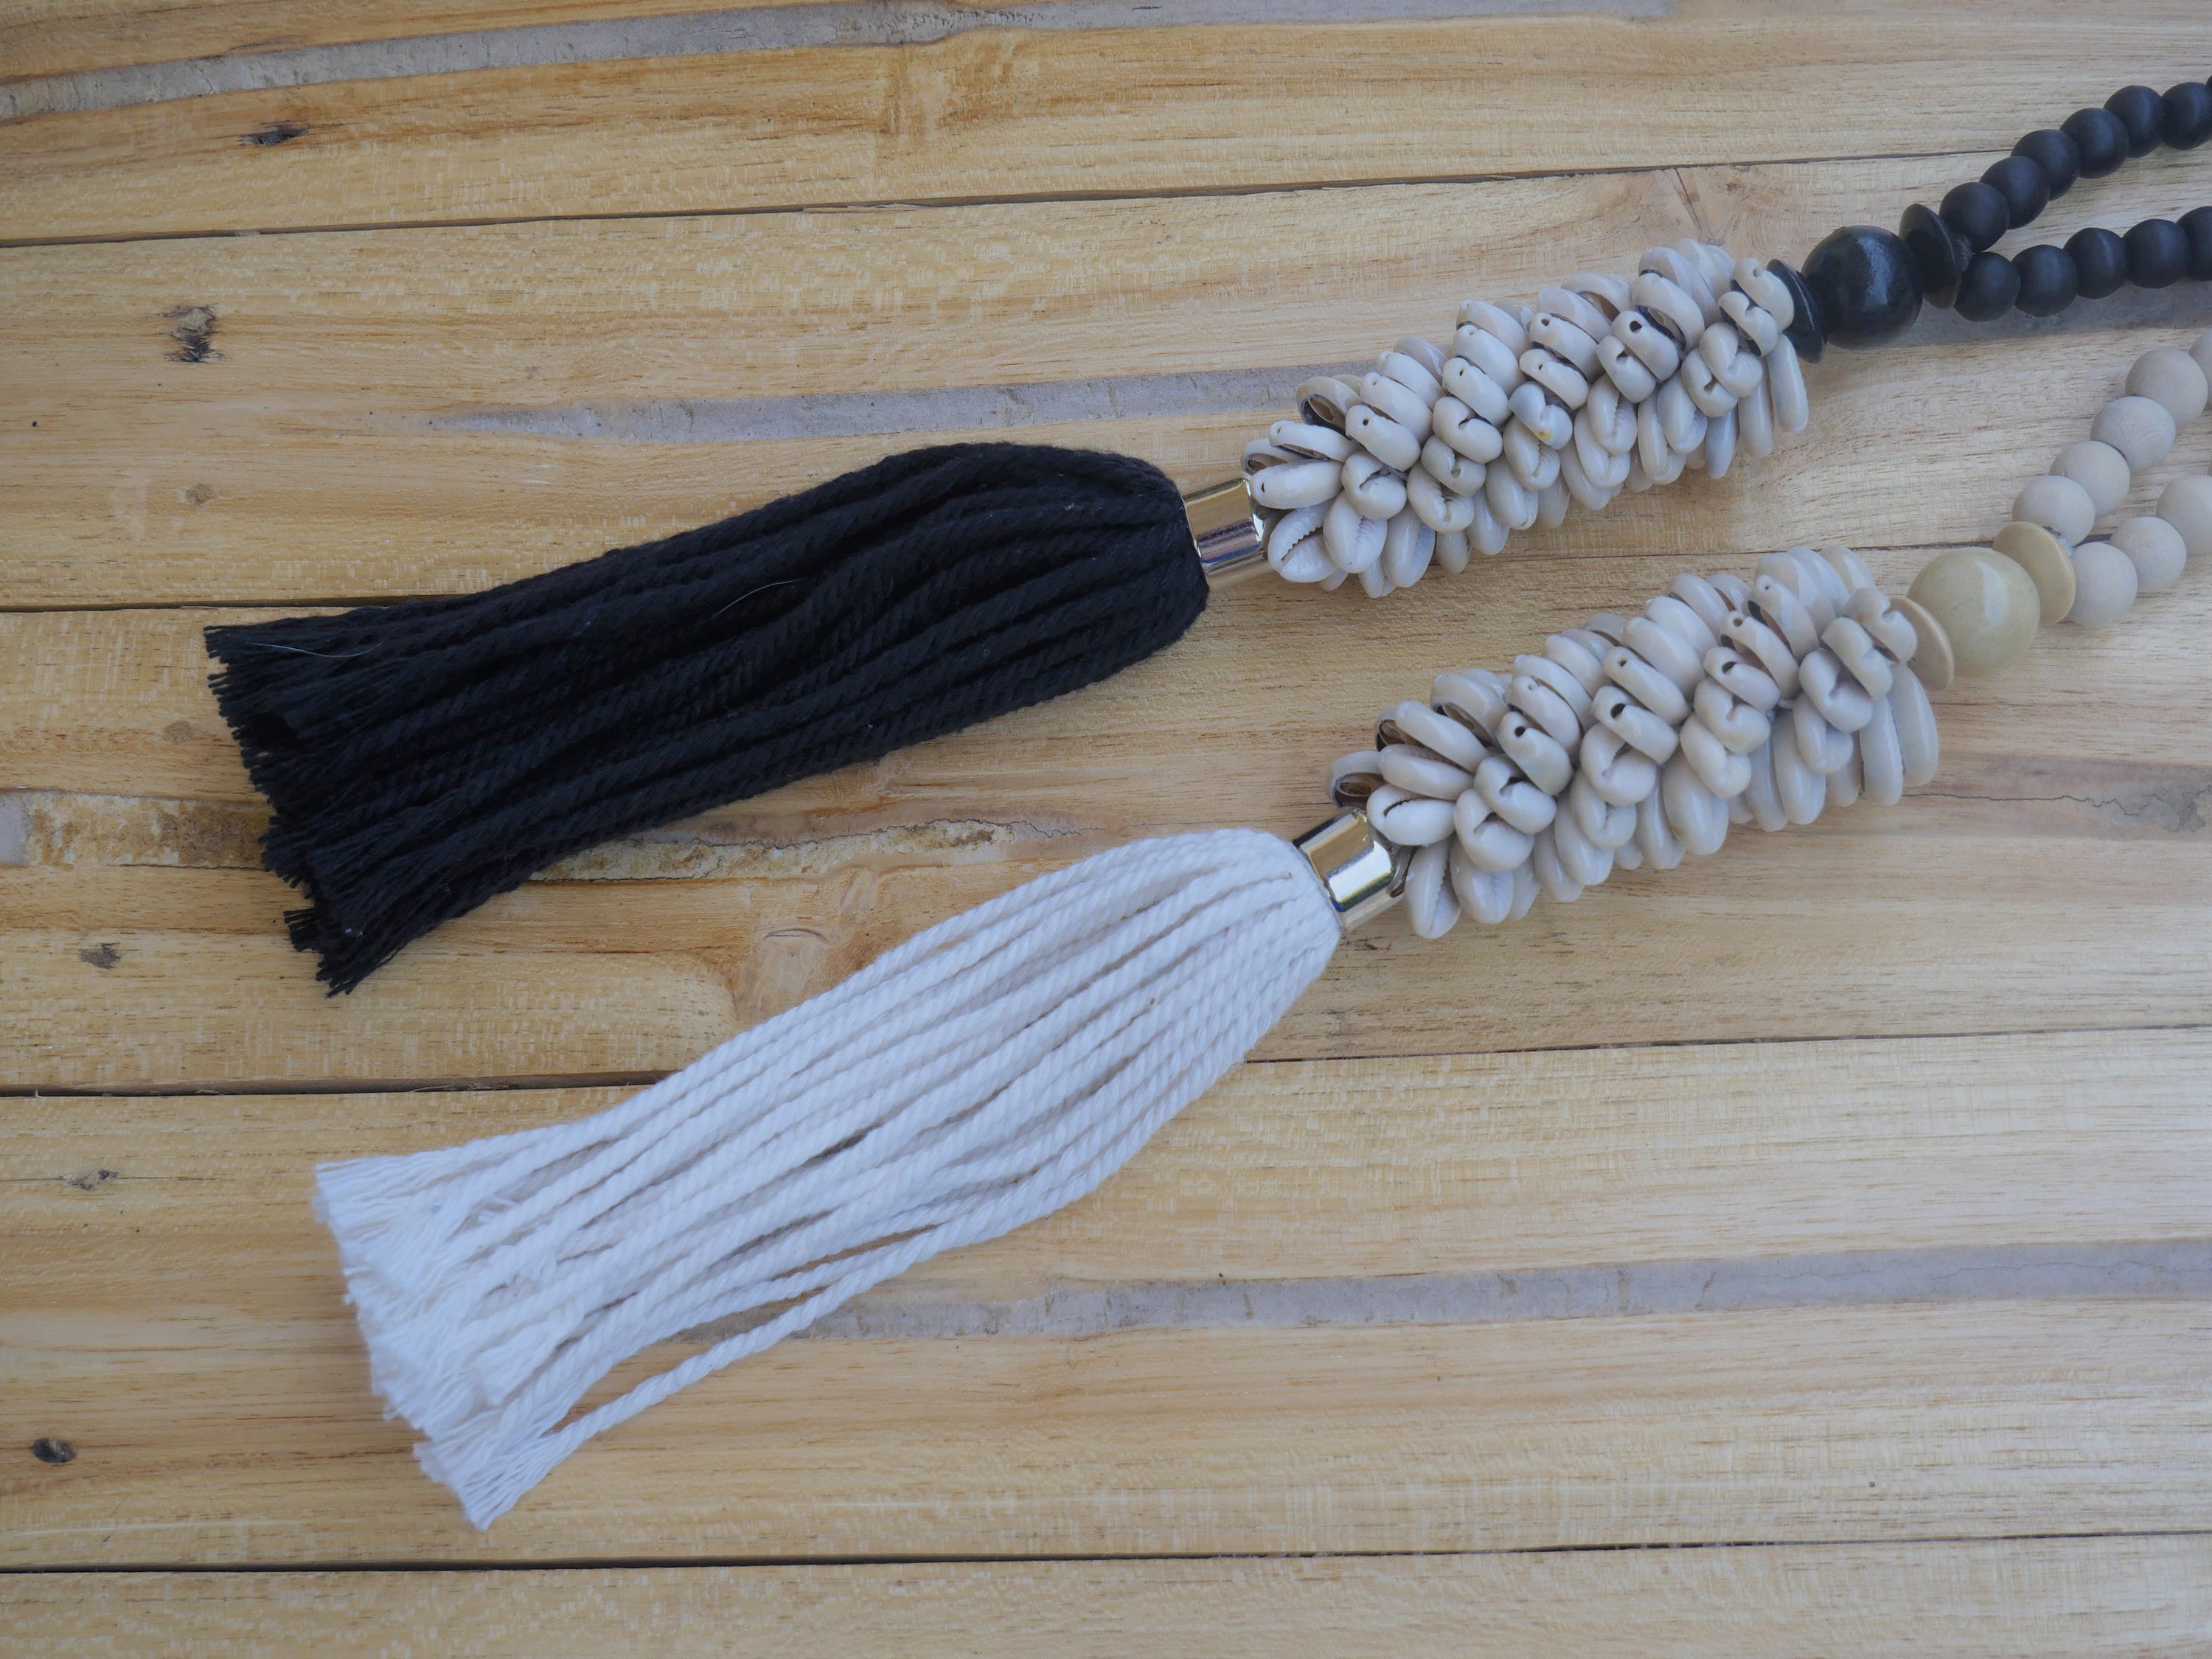 Pair of Handmade Boho Bed and Curtain Tassels with sea shells, Curtain Decor Accessories, White Curtain Holdback, Black Curtain Holdback